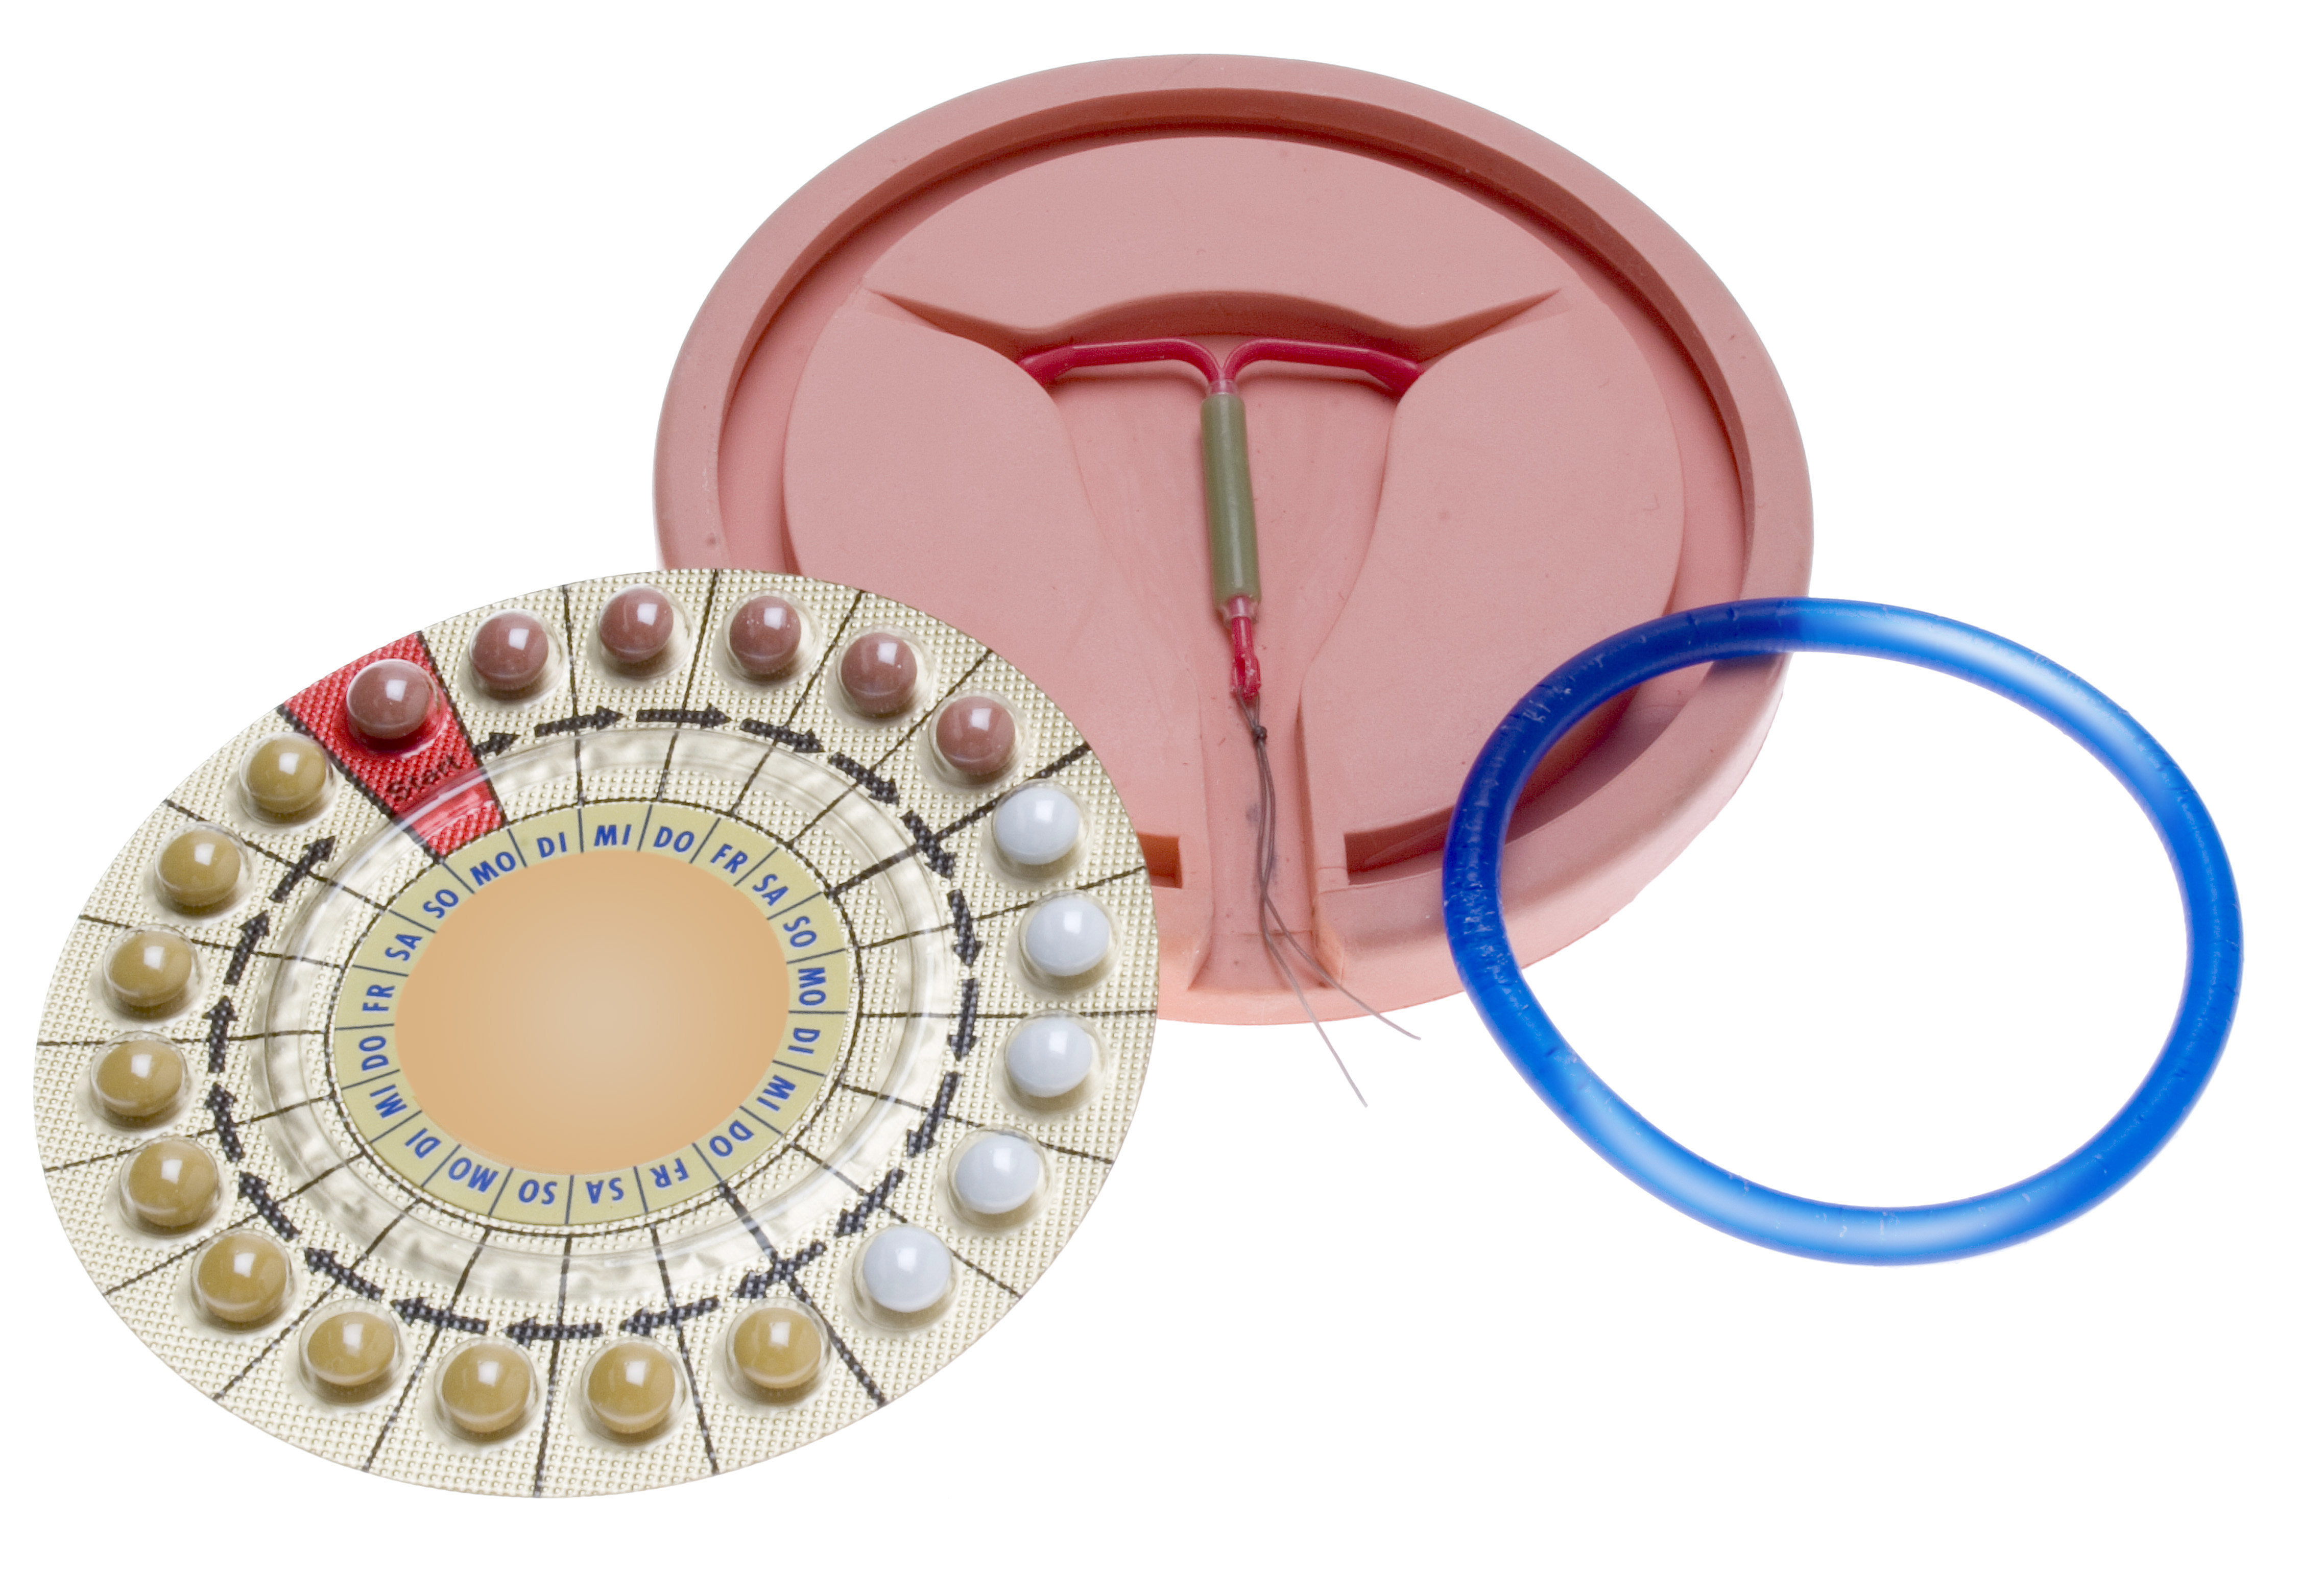 What Is the Most Effective Birth Control Method?